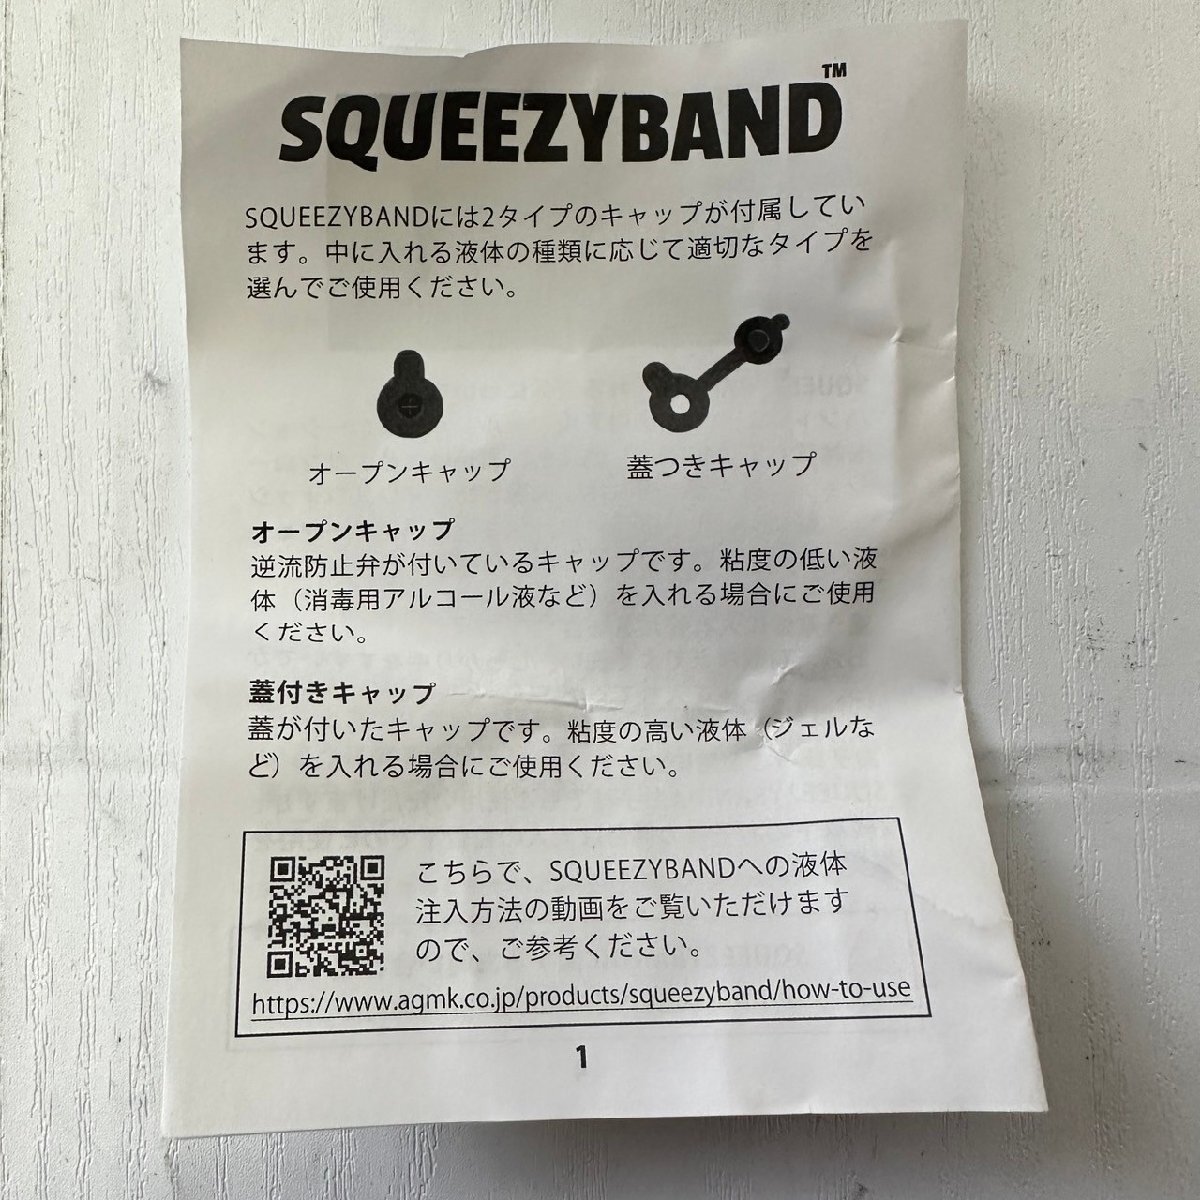 SQUEEZYBAND 除菌 消毒スプレー アルコール 携帯用 詰め替え可能 5447_画像4